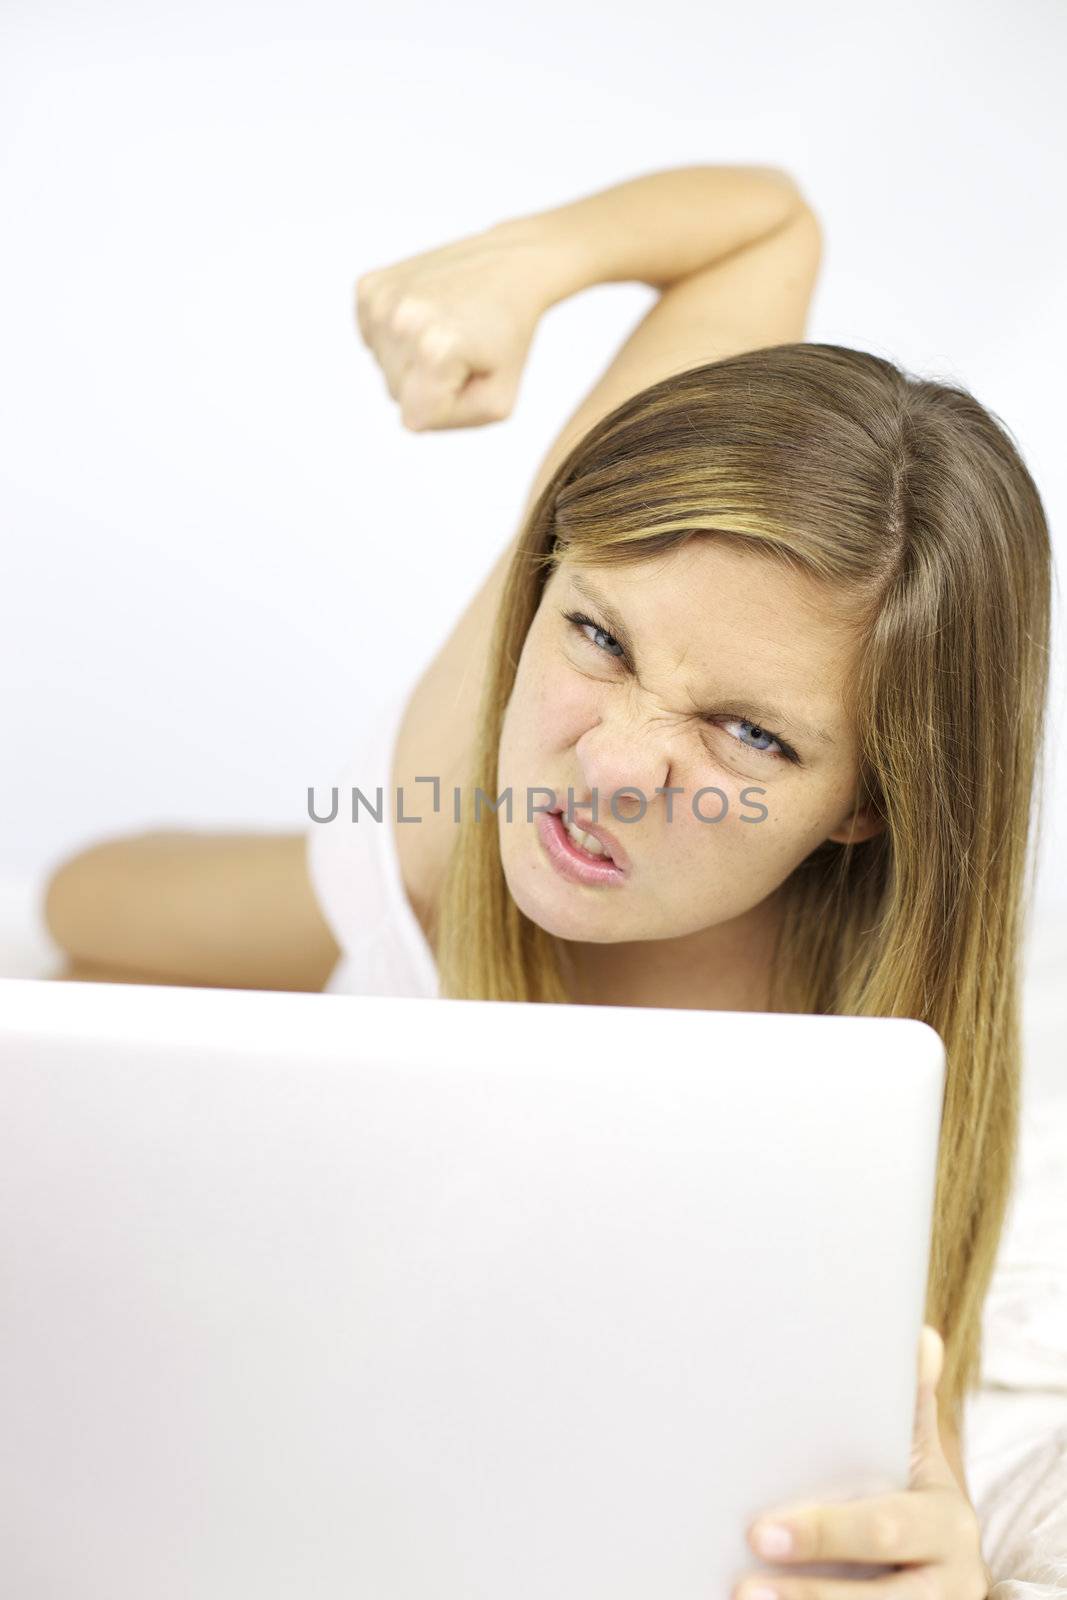 Very angry woman wanting to punch computer and destroy technology